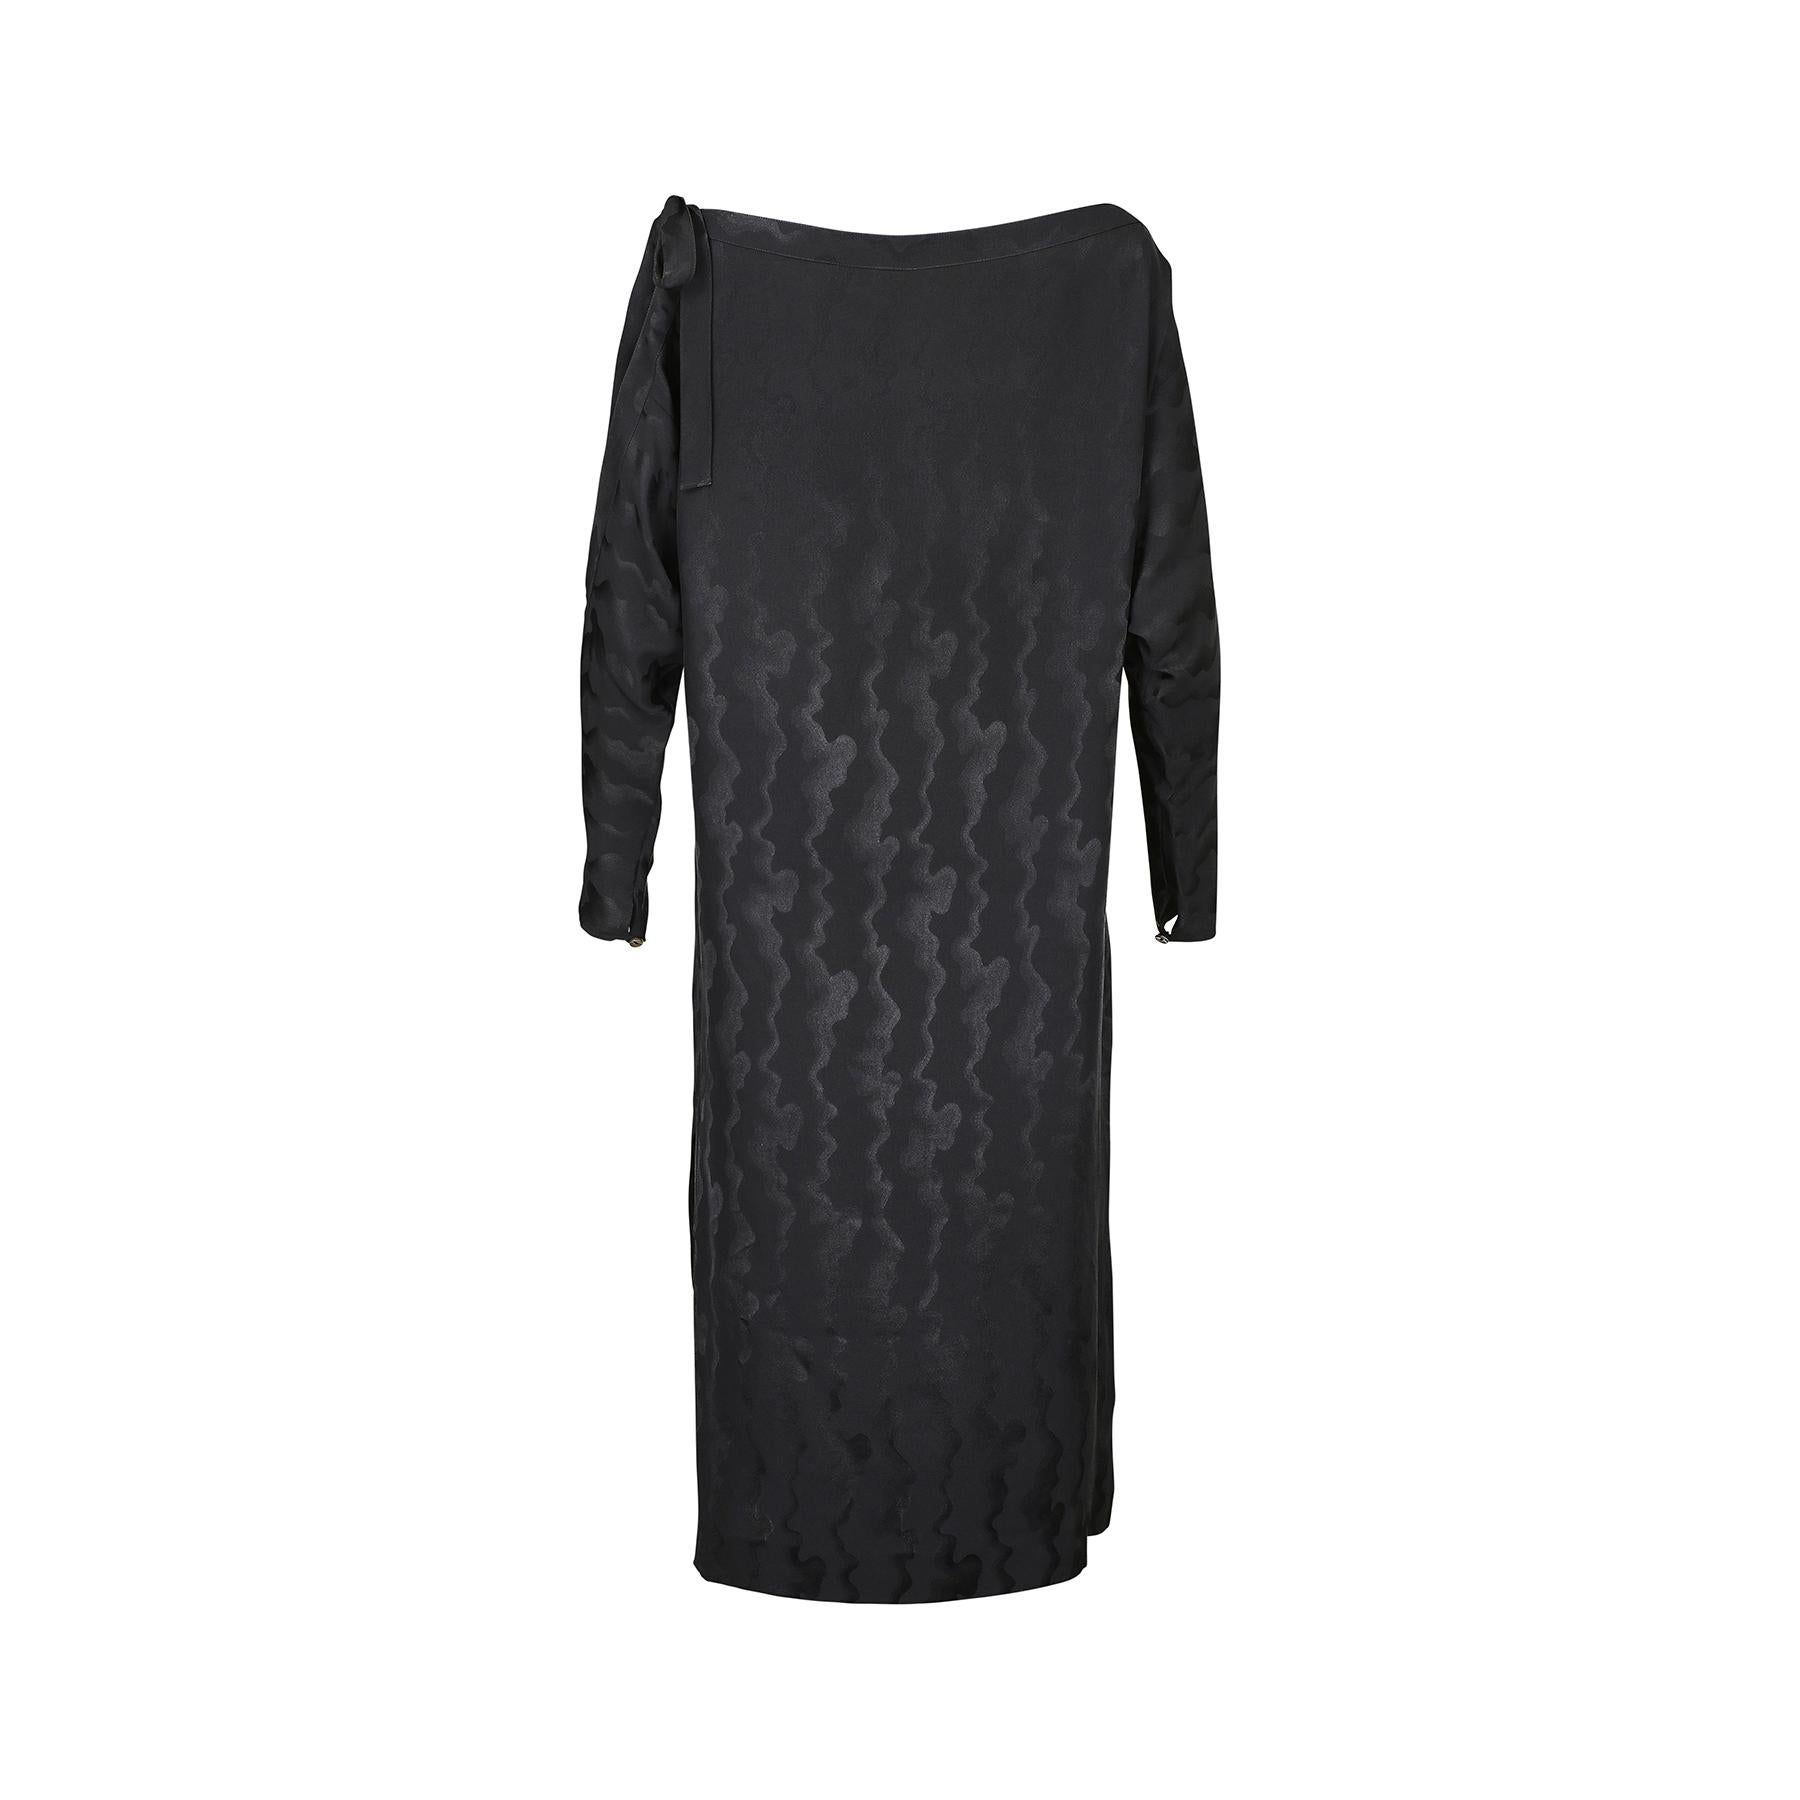 1980s Charles Jourdan Black Cold Shoulder Dress In Excellent Condition For Sale In London, GB